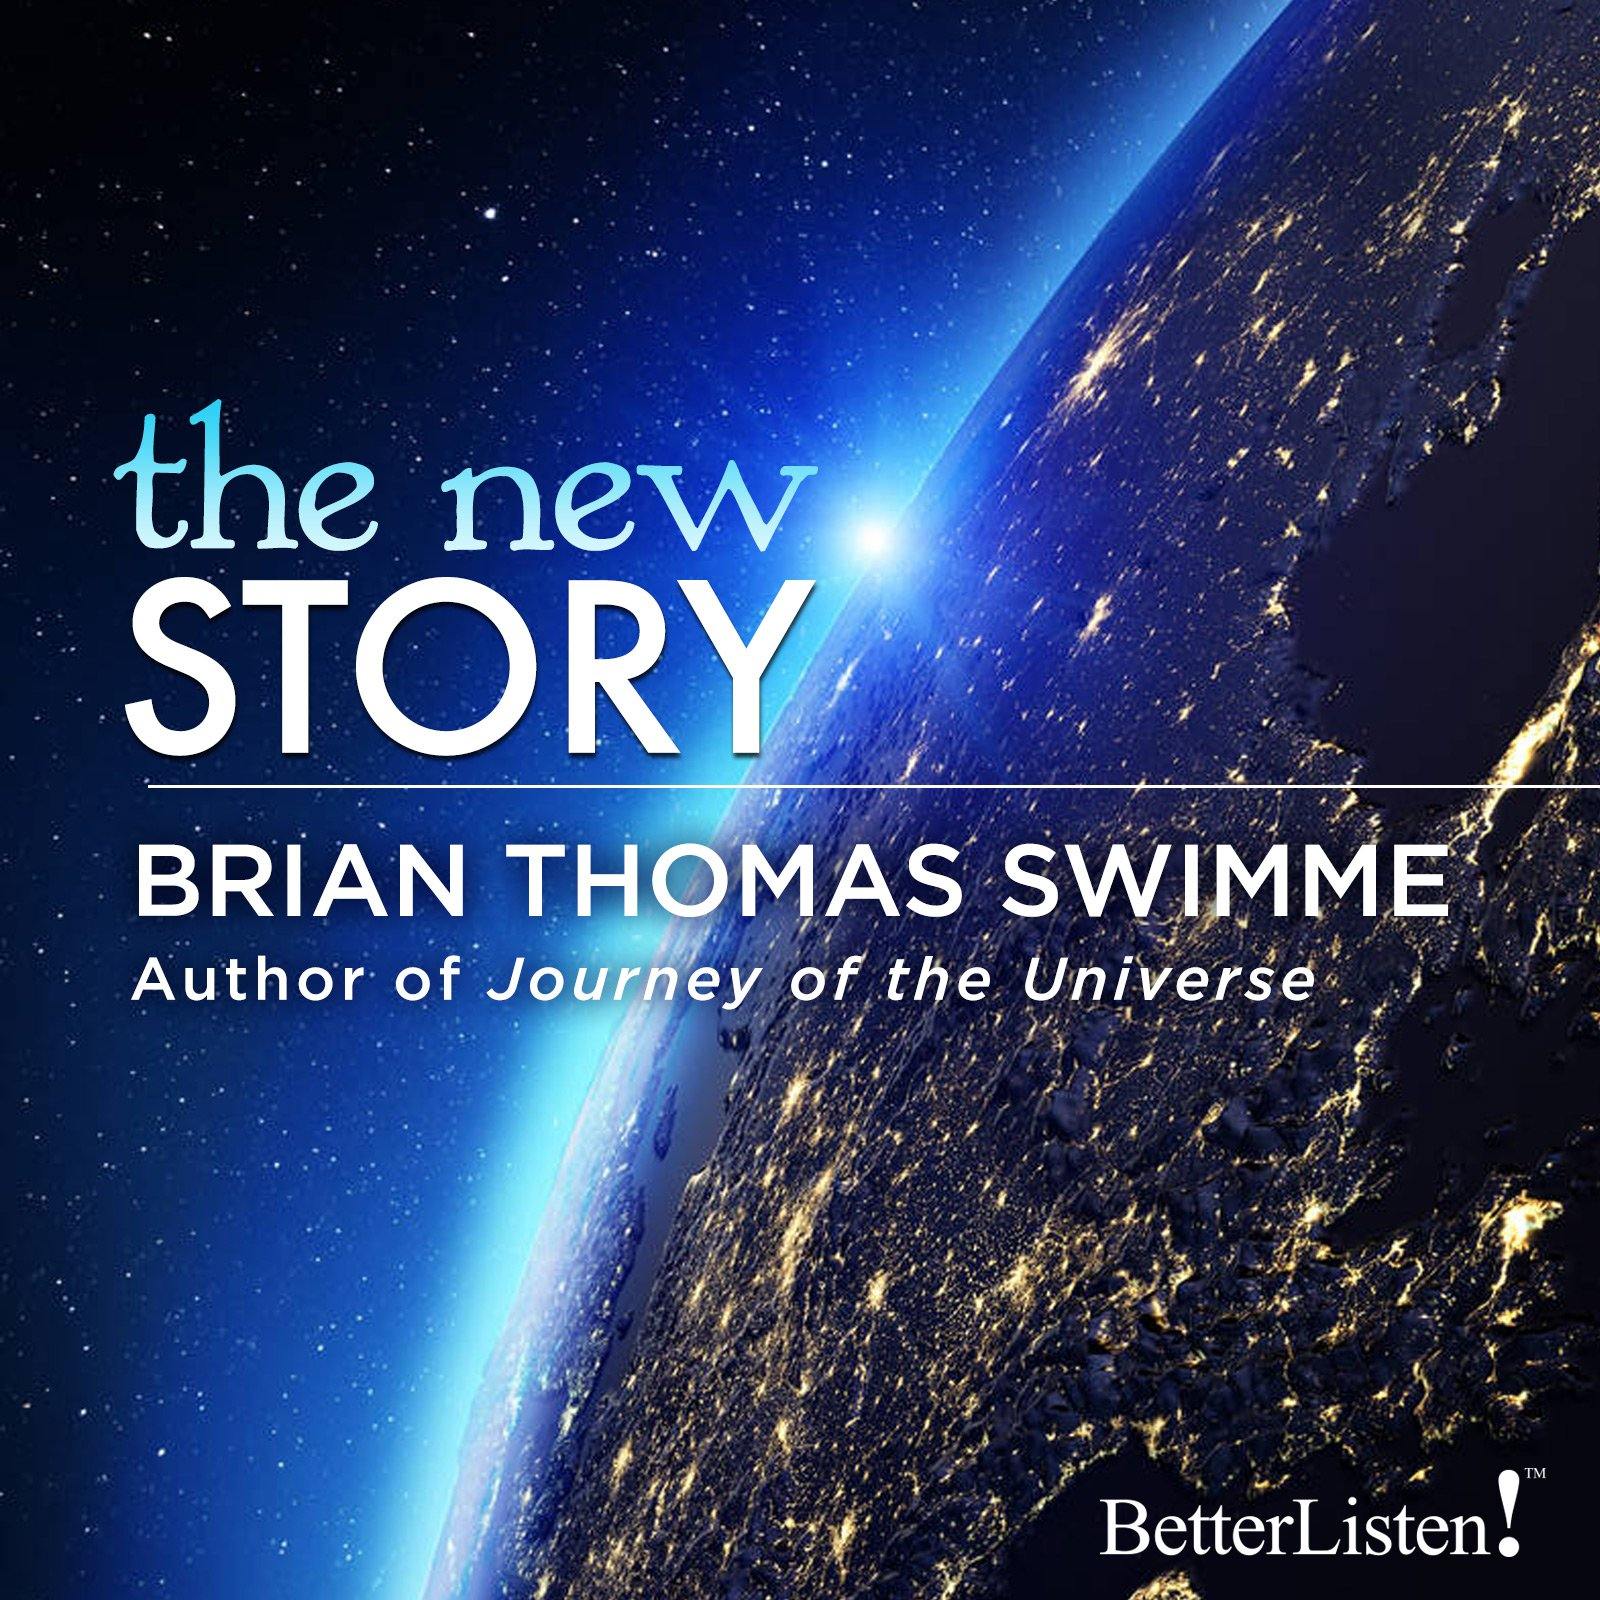 The New Story with Brian Thomas Swimme - BetterListen!